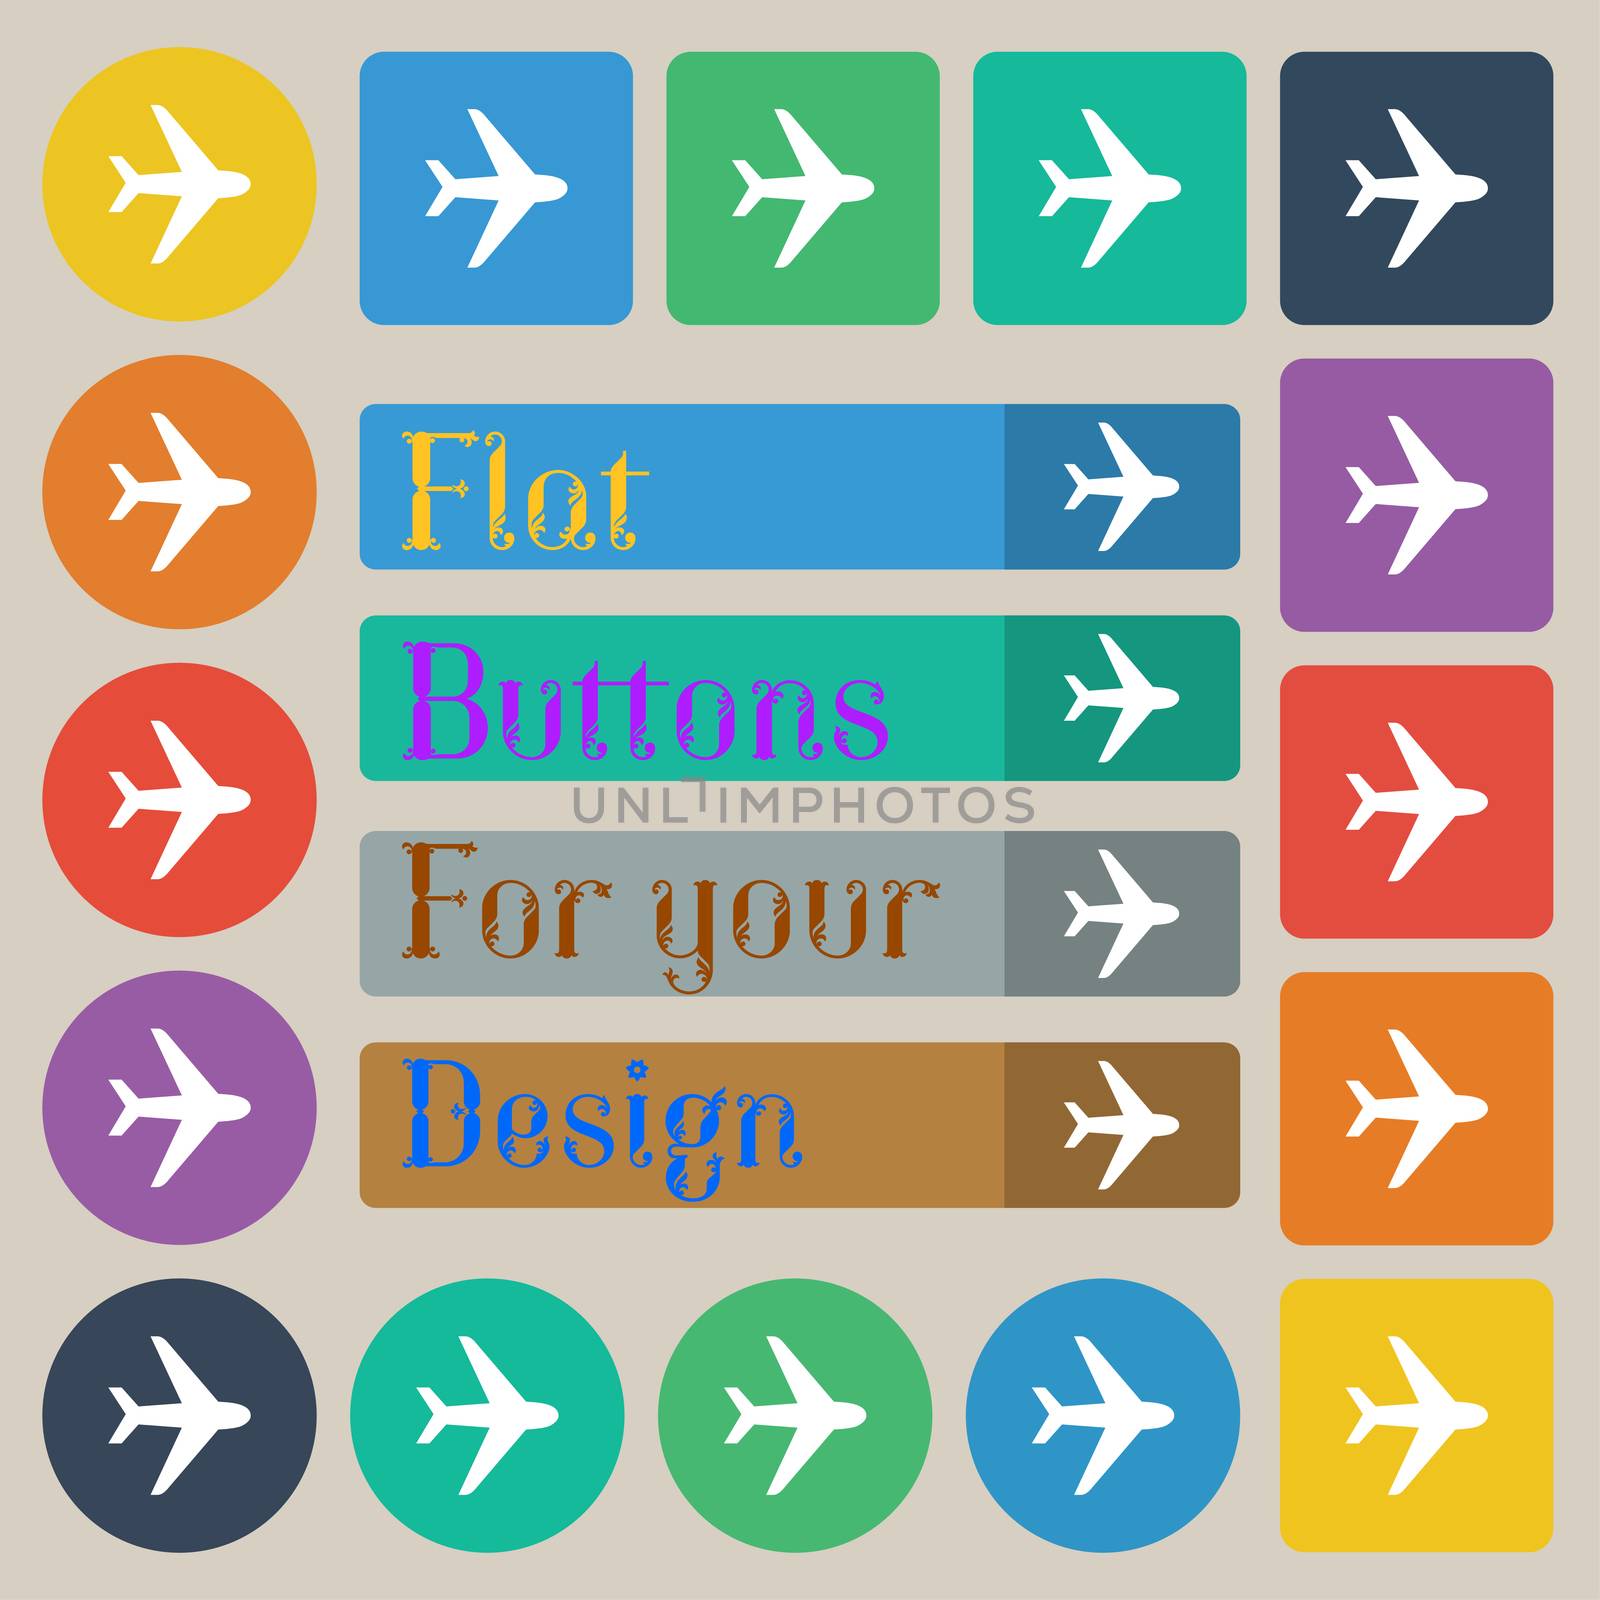 Plane icon sign. Set of twenty colored flat, round, square and rectangular buttons. illustration